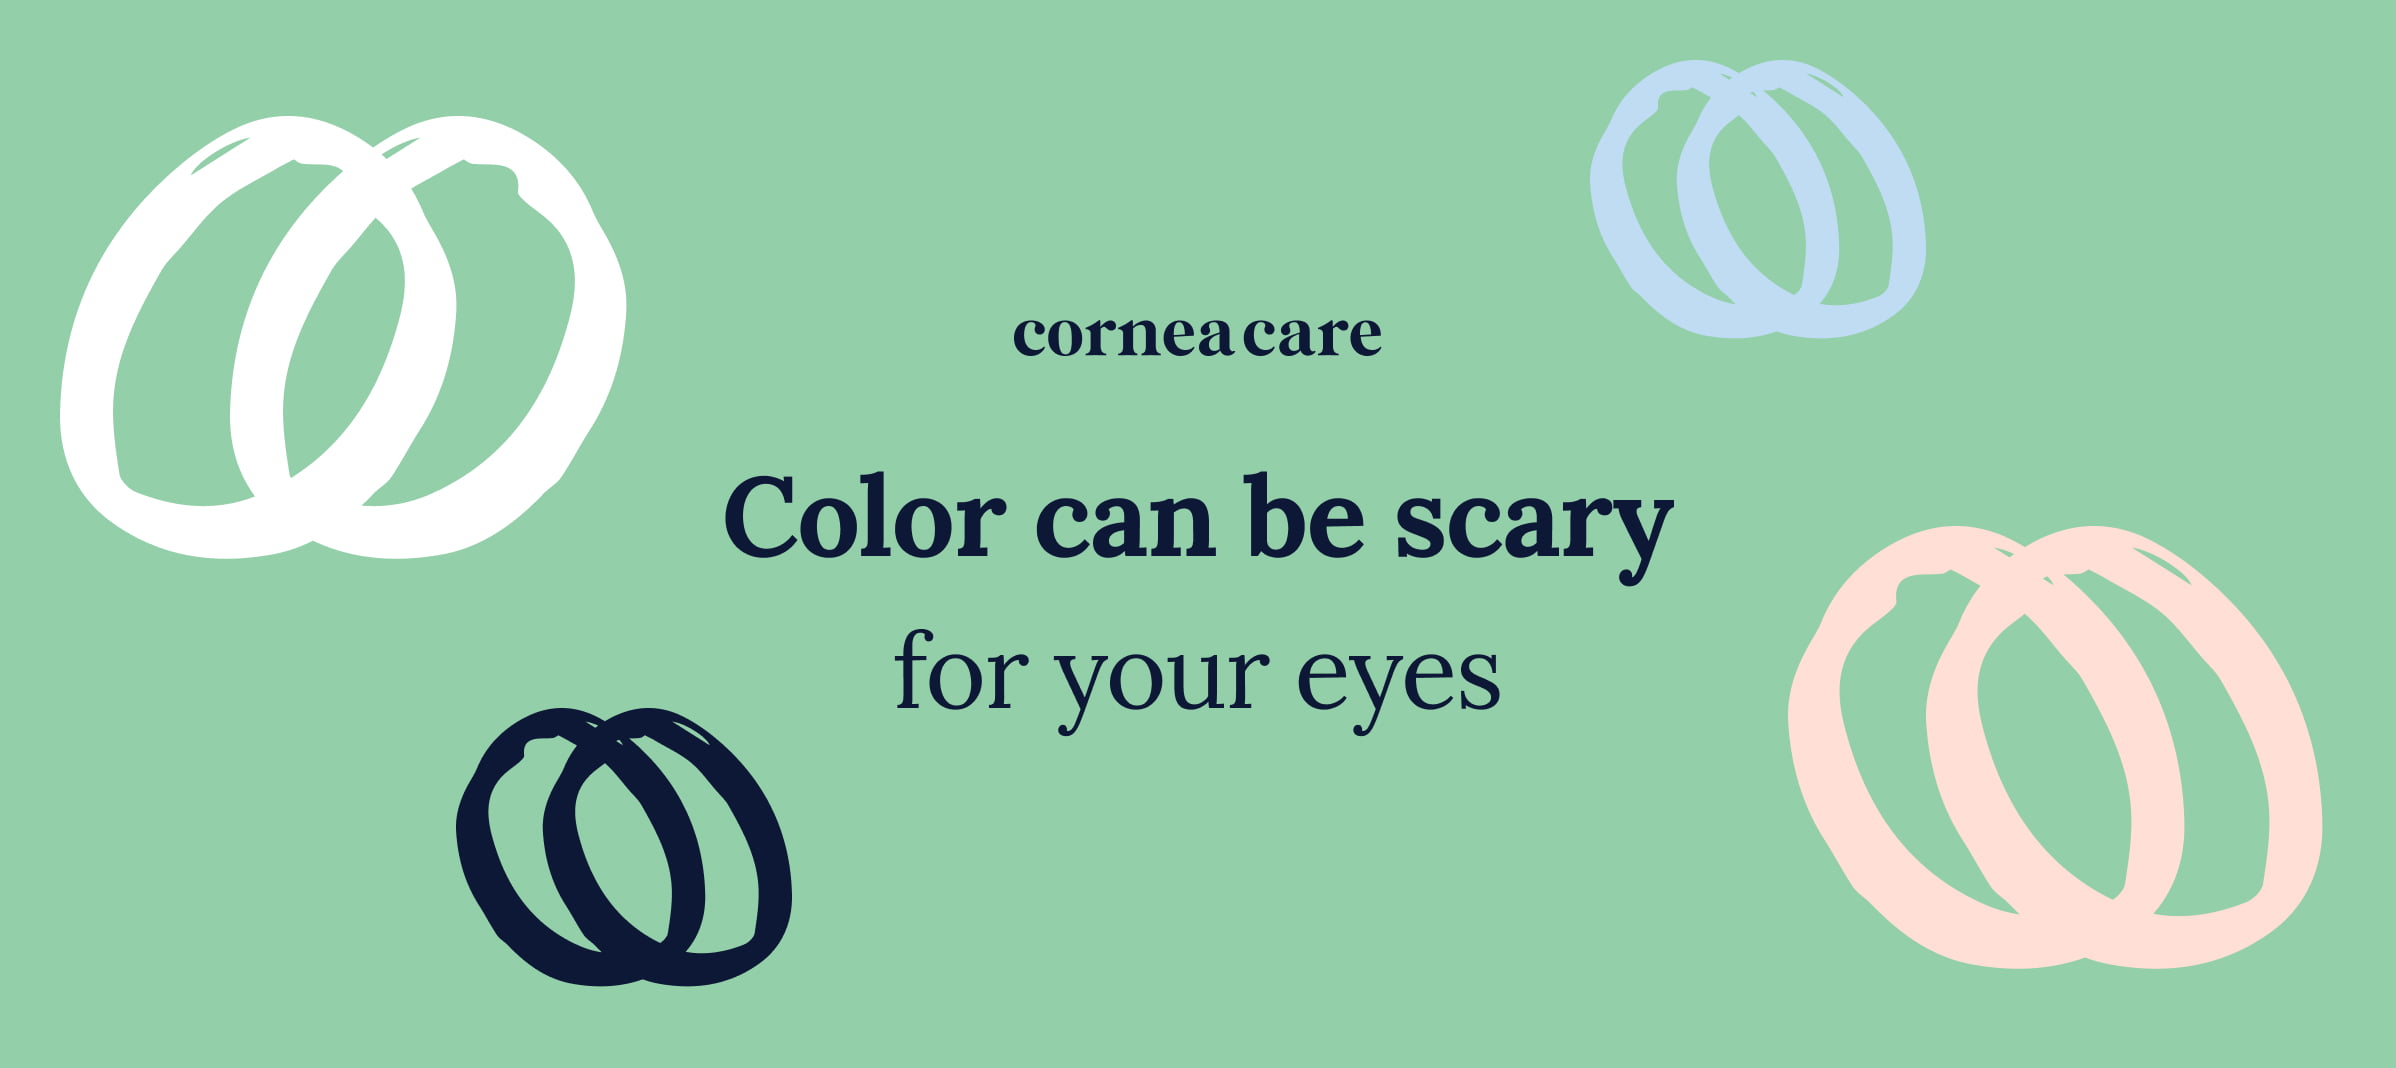 Are Colored Contact Lenses Safe?